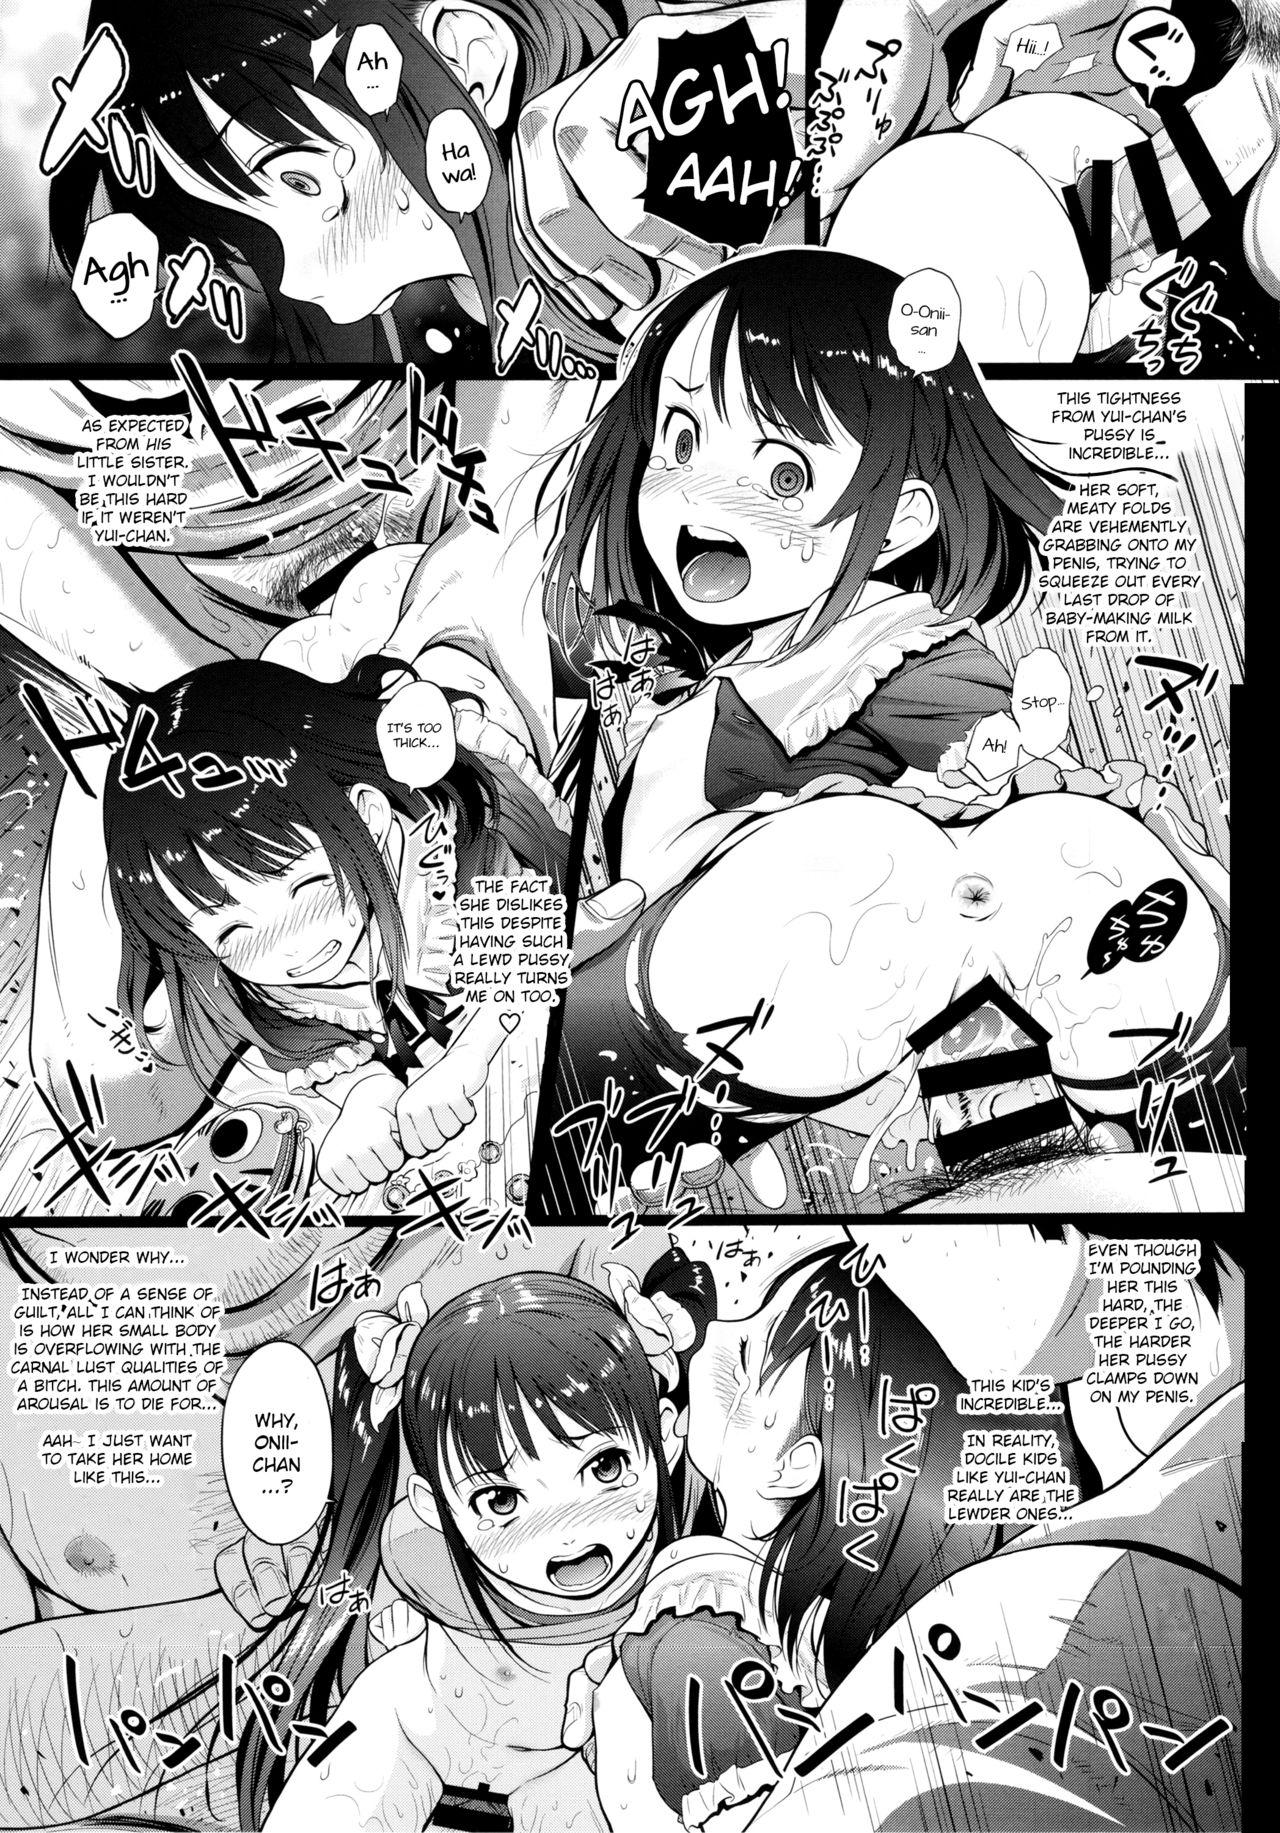 Best Blowjobs Ever Imouto Koukan | Little Sister Exchange - Original White Chick - Page 6